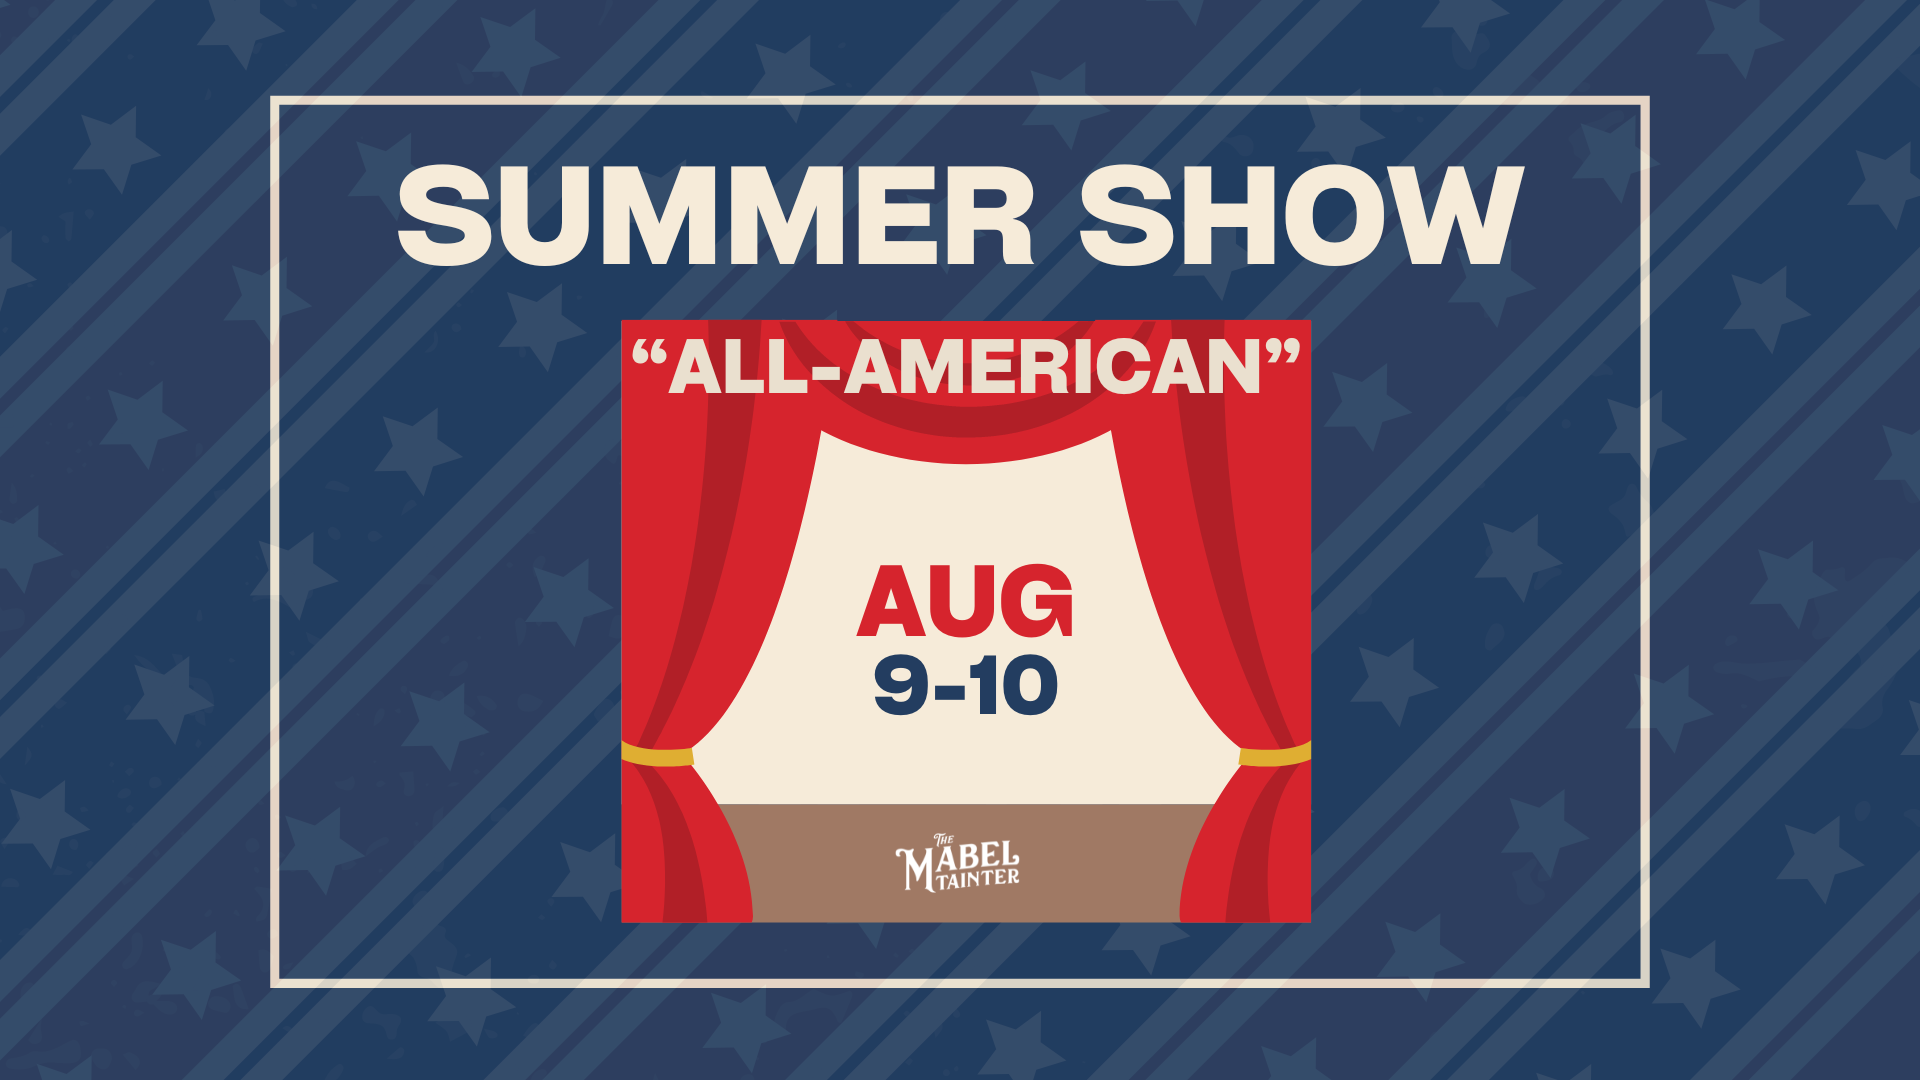 Mabel Tainter's Summer Show: All-American